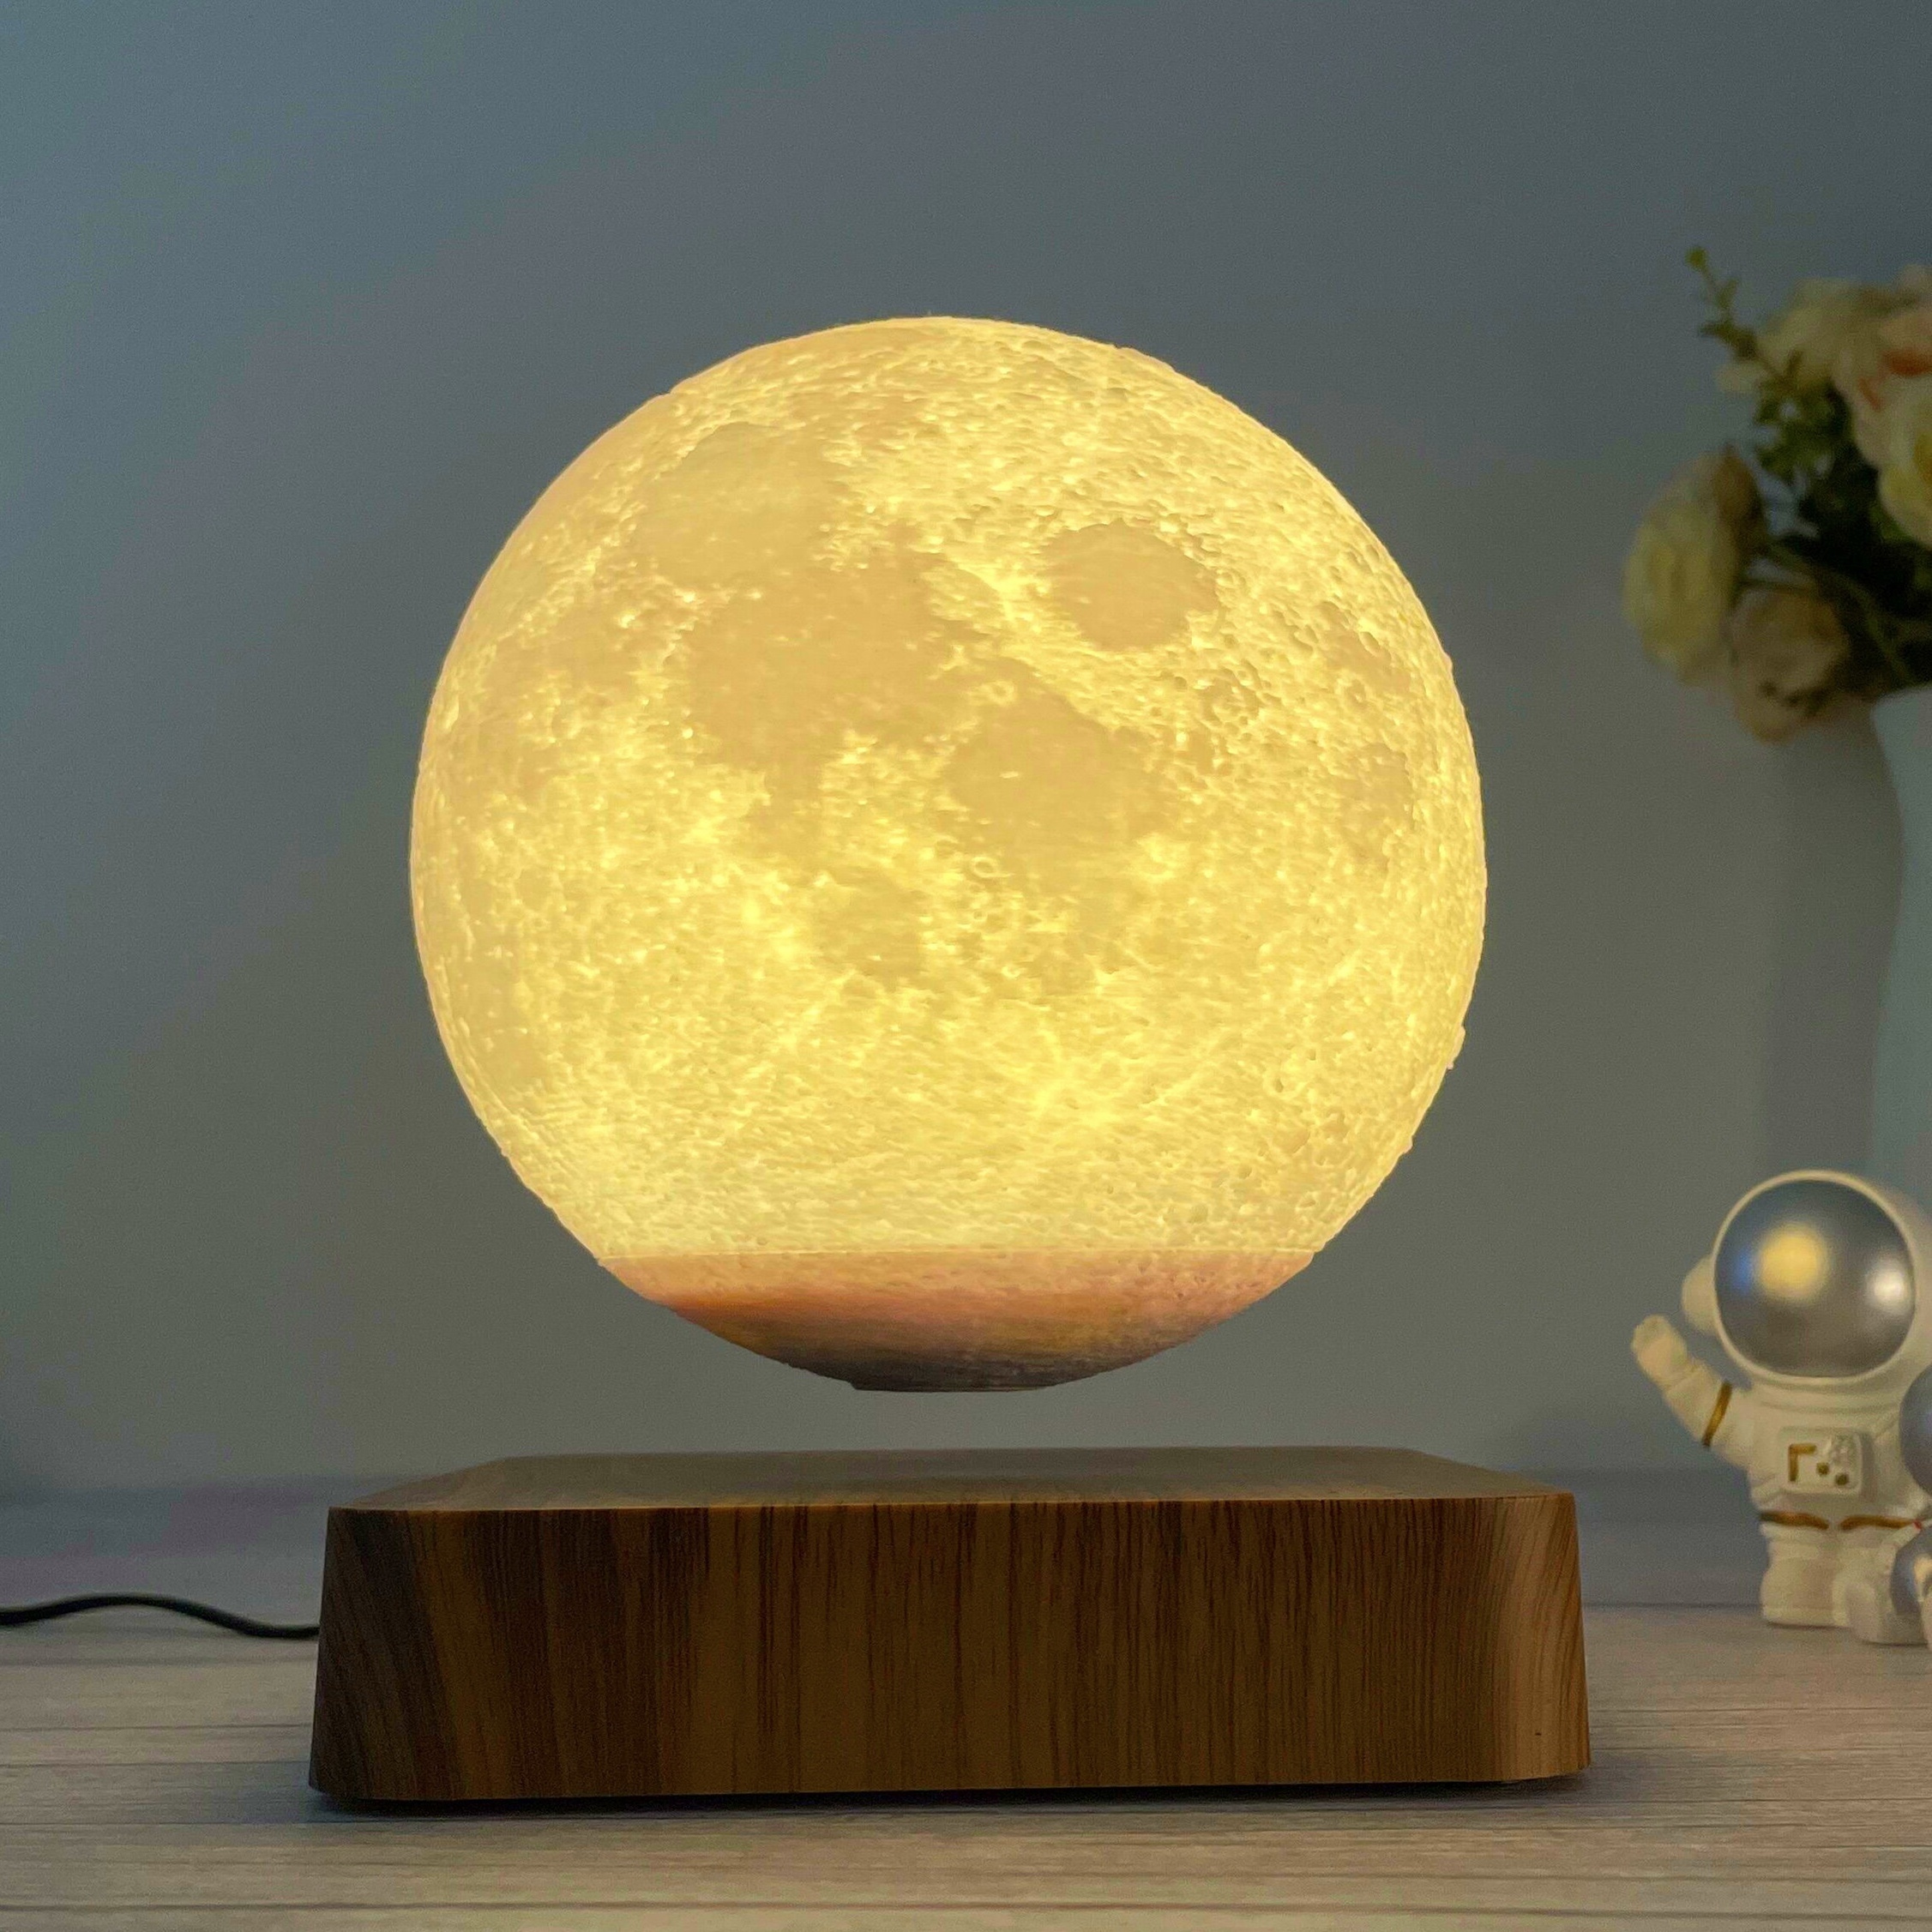 1pc levitating moon table lamp magnetic floating night light with 3 lighting modes 3d printed levitation bedside table lamp for office bedroom home decoration details 9